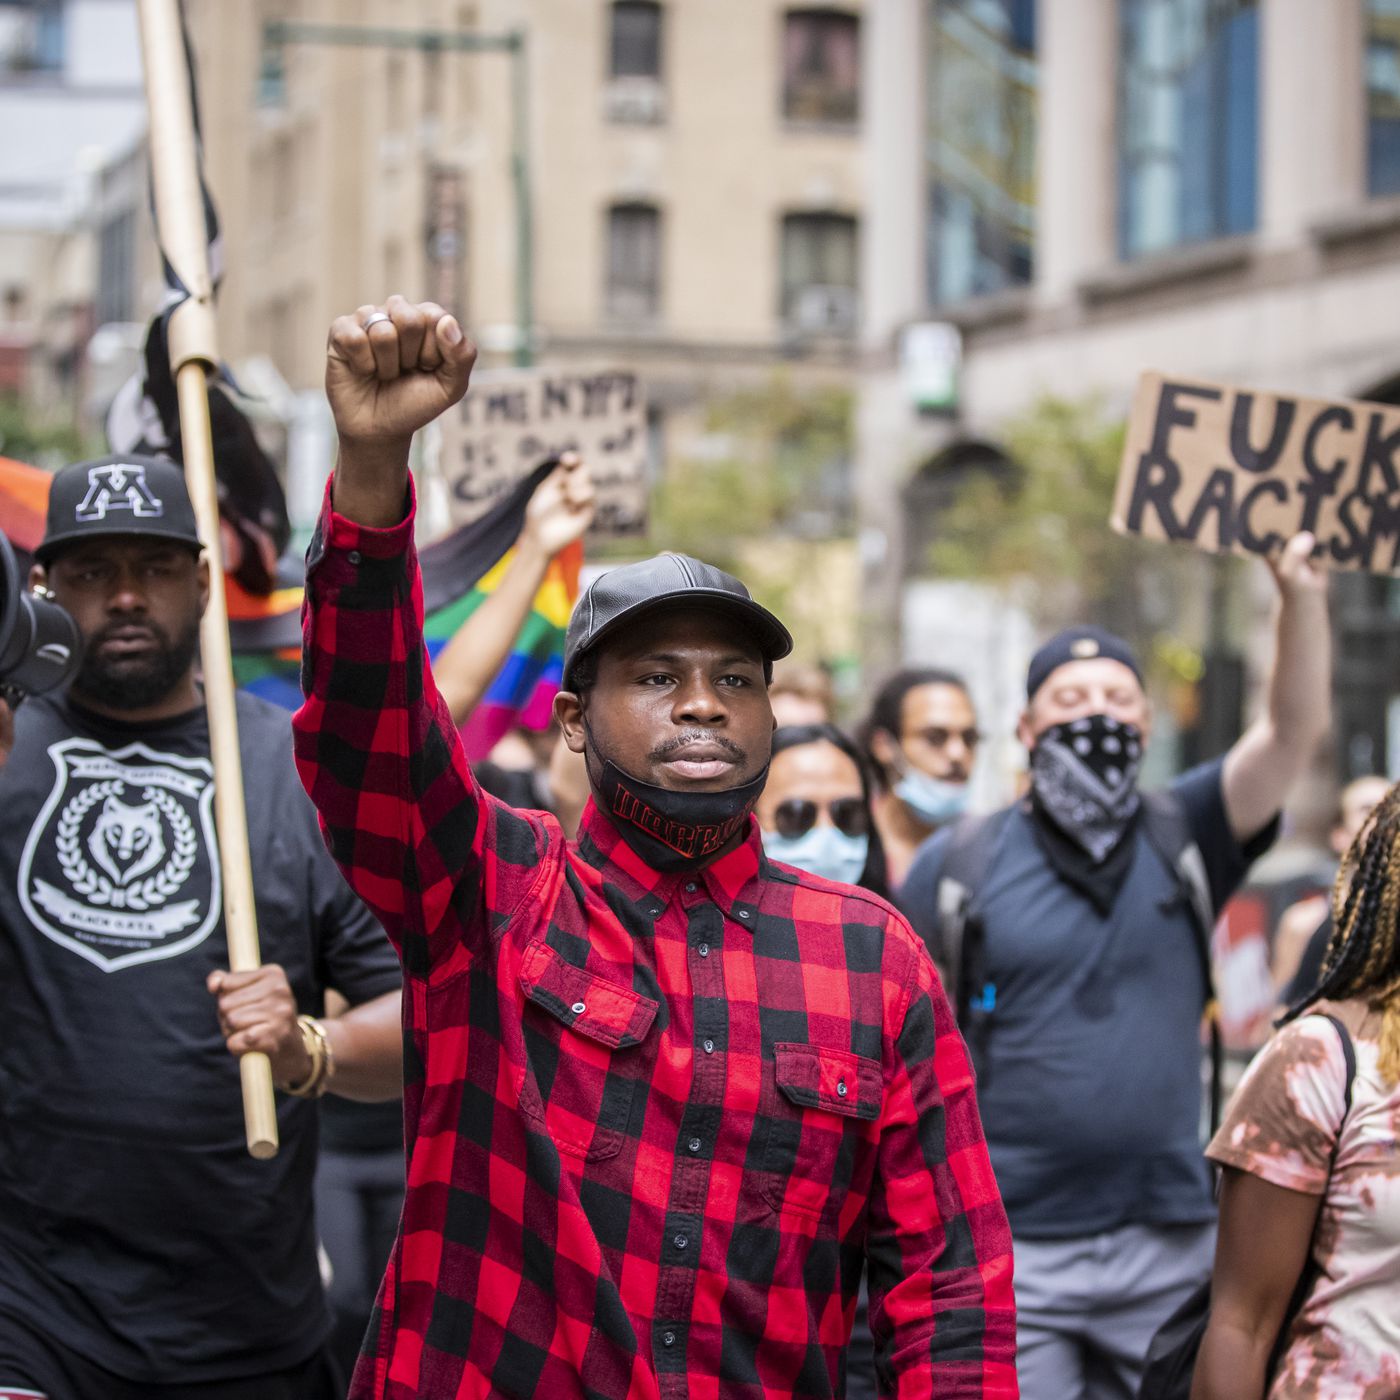 NYPD used facial recognition to track down Black Lives Matter activist -  The Verge